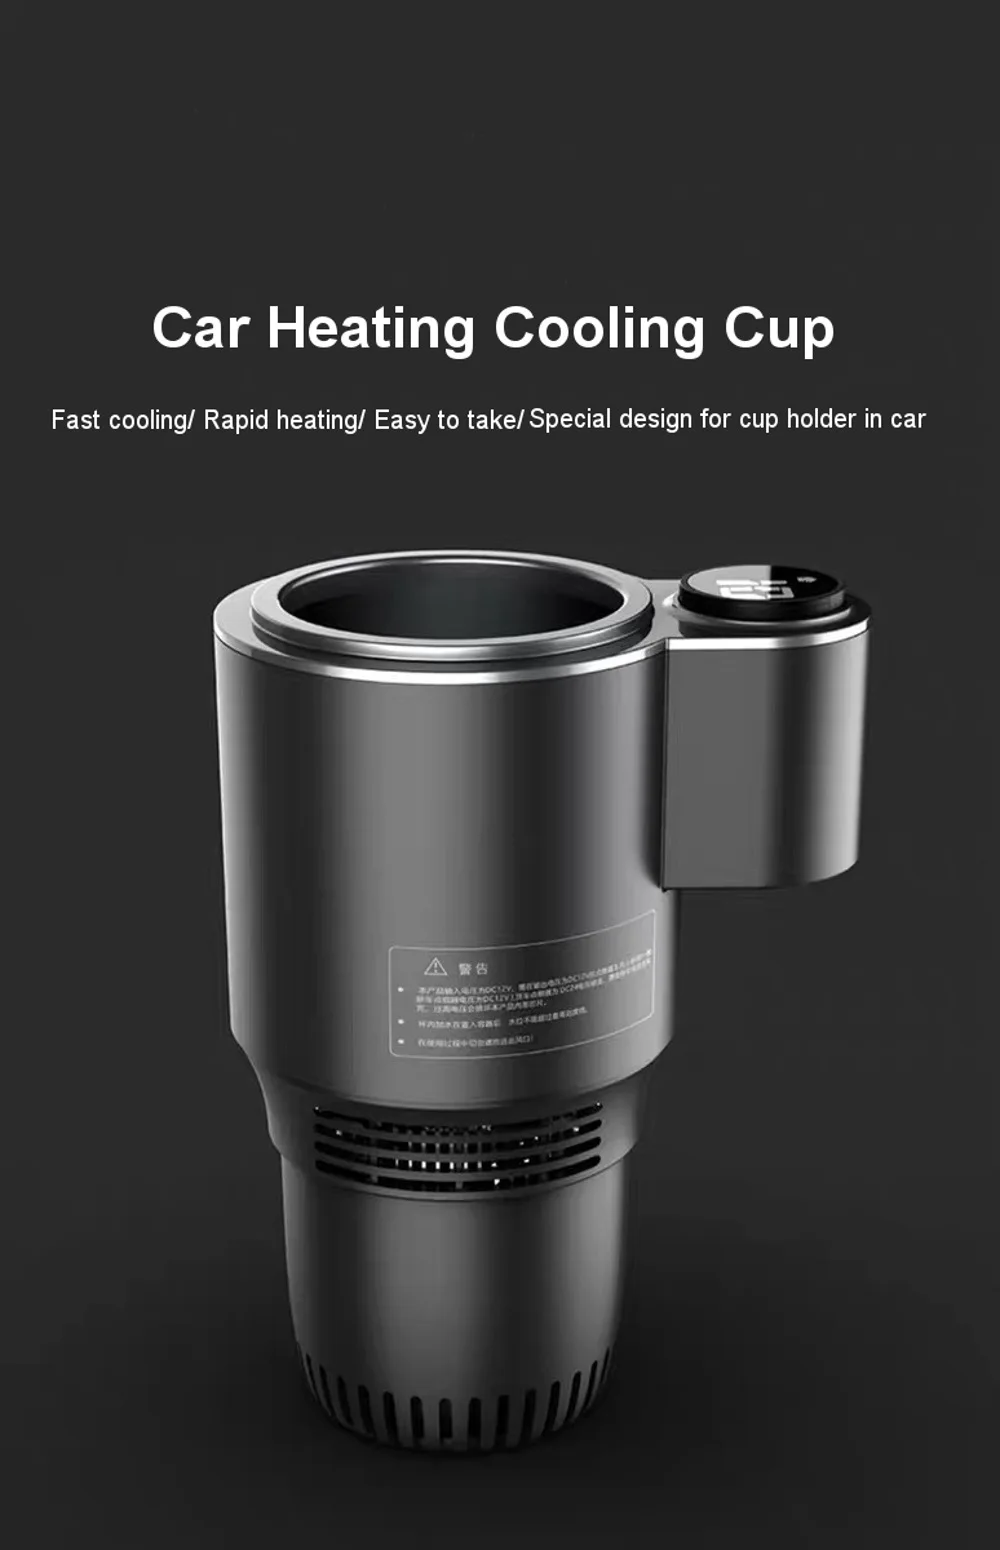 DC 12V Car Heating Cooling Cup 2-in-1 Warmer Cooler Smart Small Refrigerator Beverage Drinks Cans for Office Auto camping fridge freezer